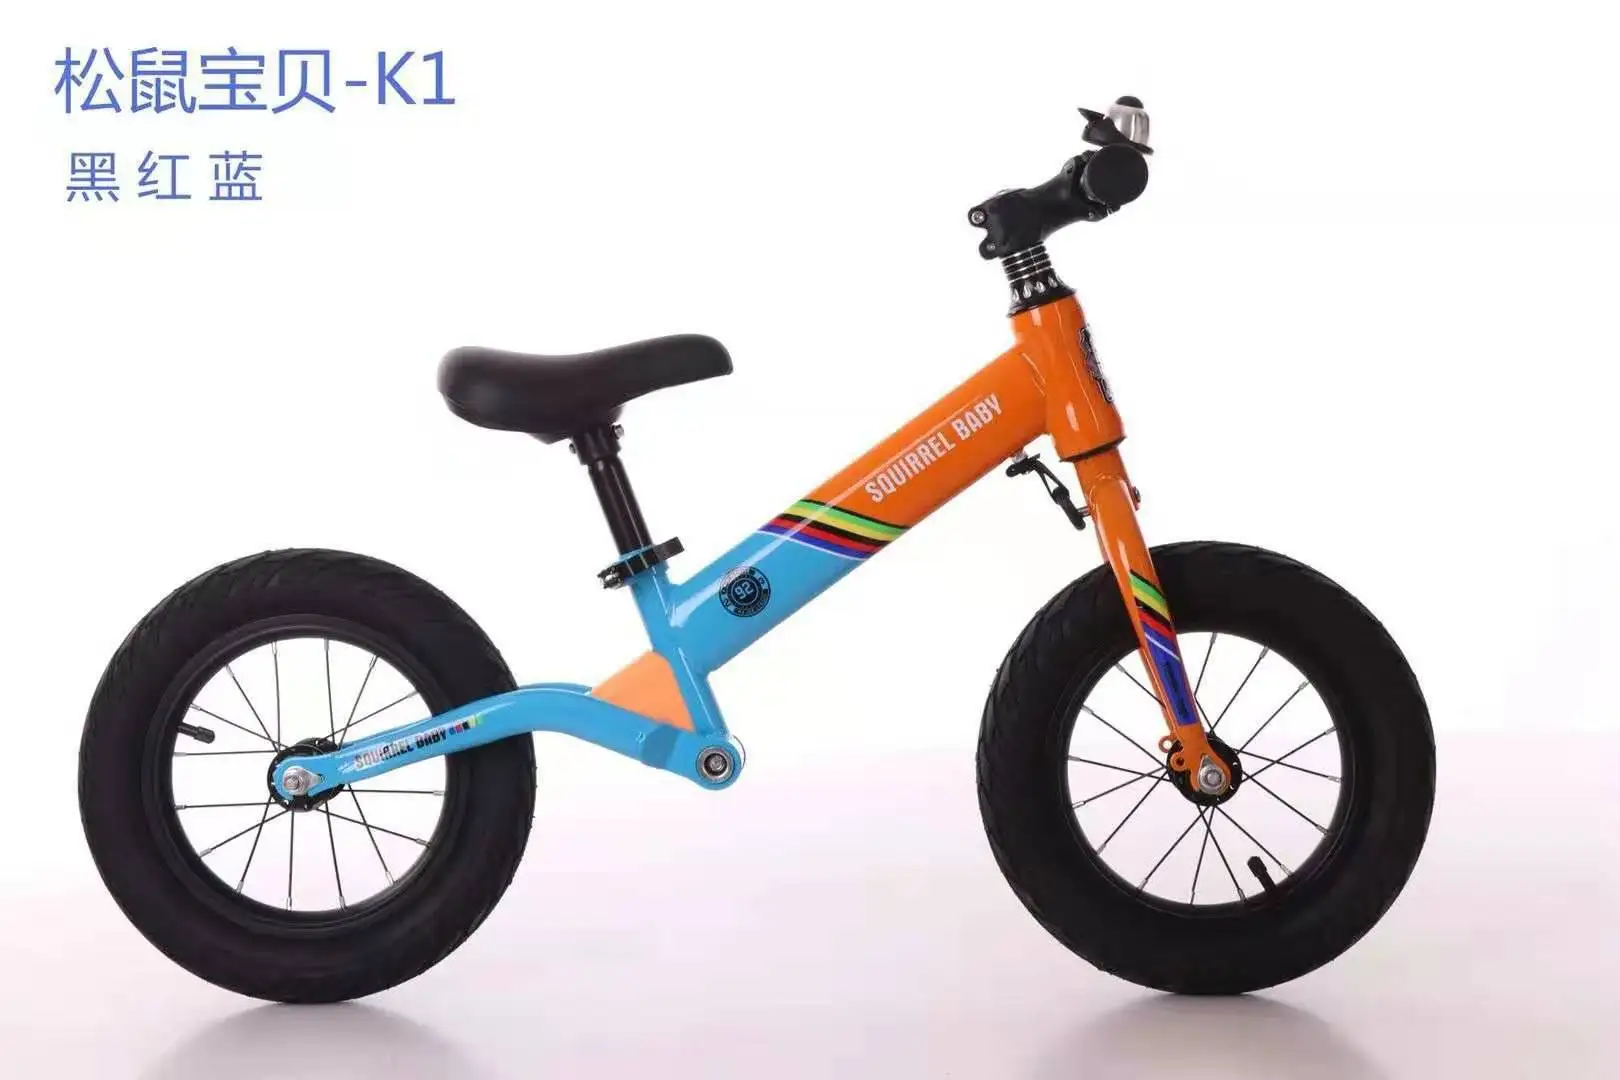 Sale 2-6 years old children balance bicycle without pedals slide bike boys and girls baby shock bike racing version 0